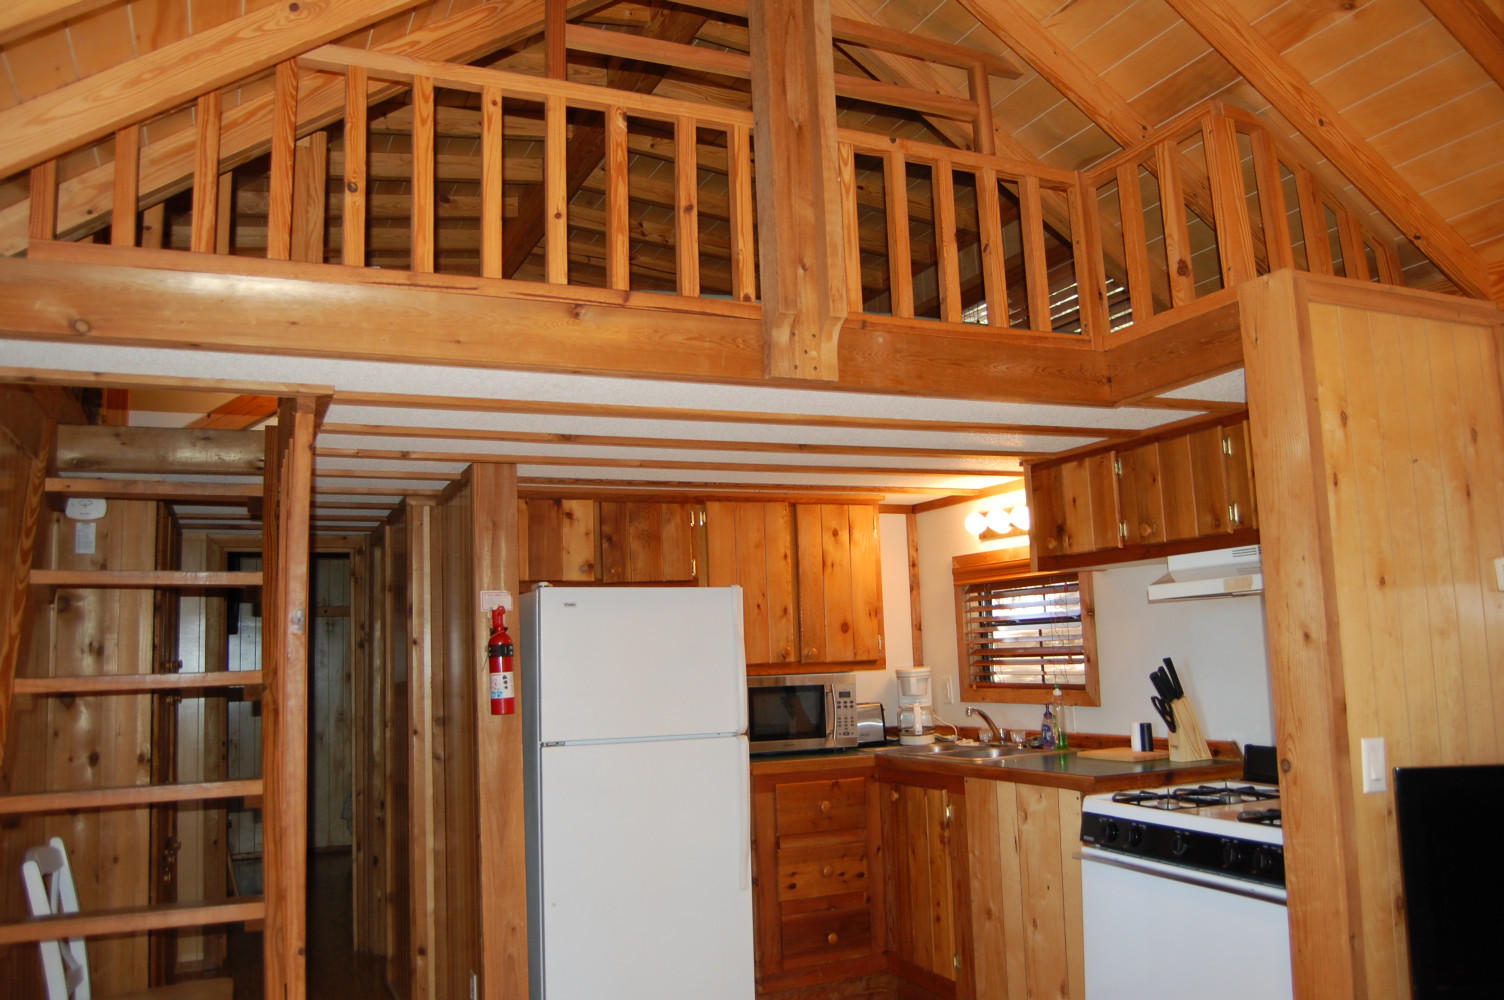 Kitchen and loft of one bedroom cabin